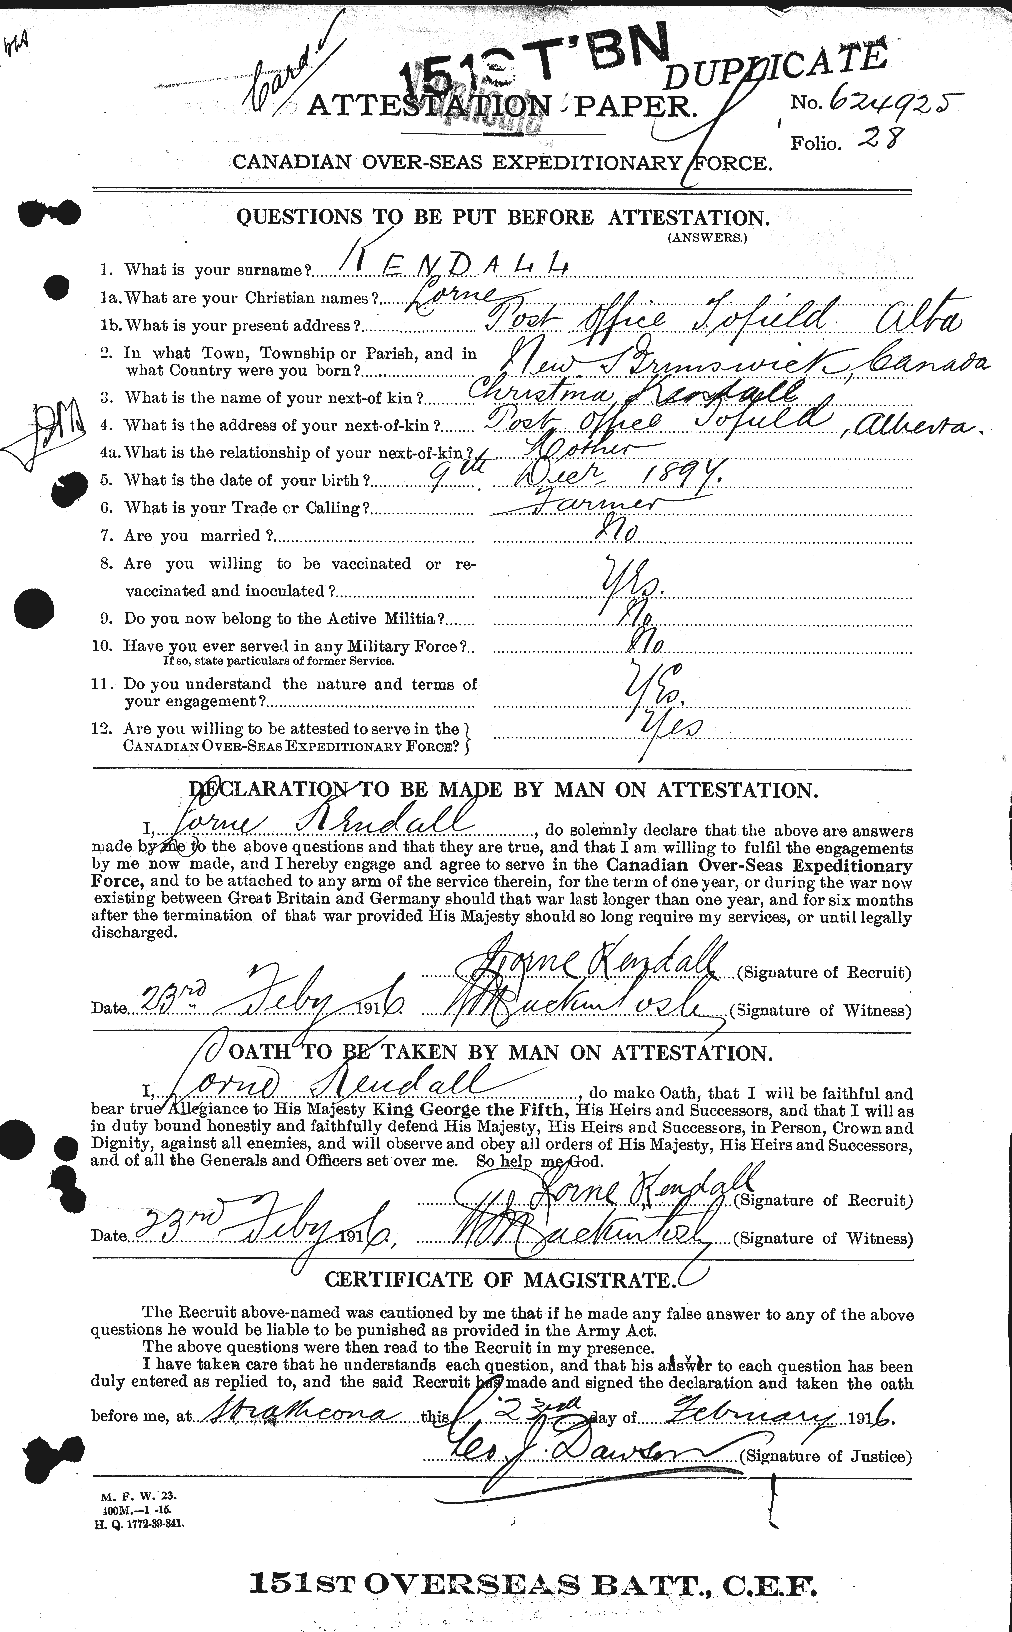 Personnel Records of the First World War - CEF 435591a